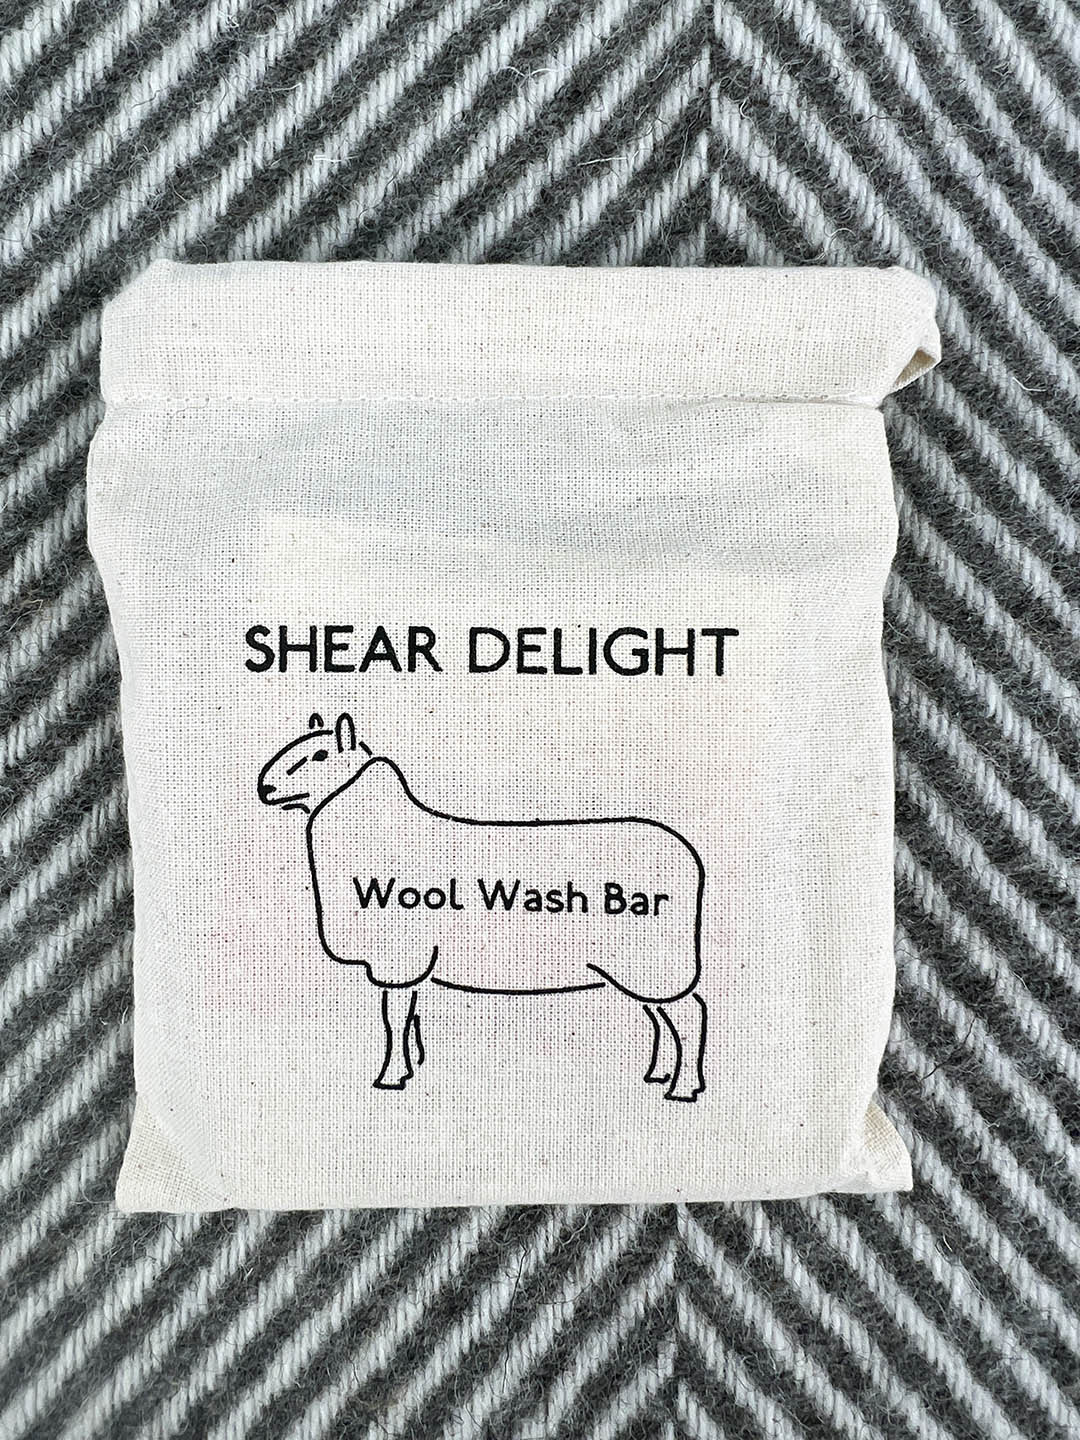 Wool wash bar with pouch bag and instructions for use.